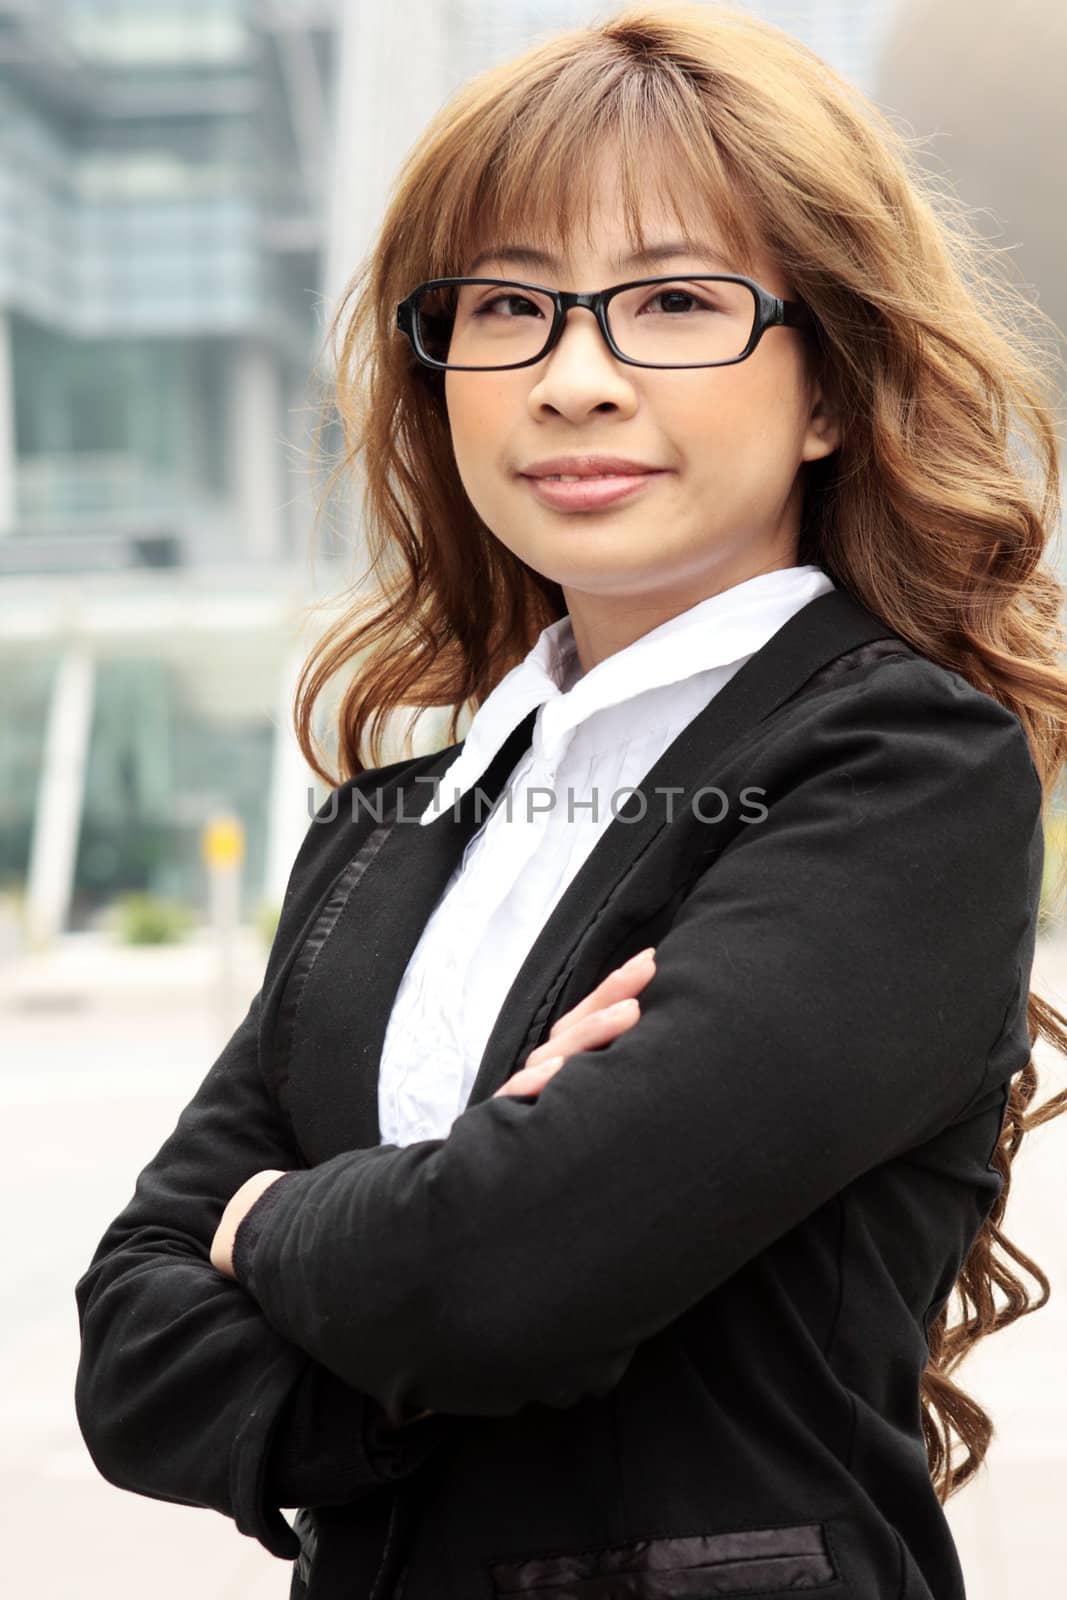 Great smiling outdoor young executive 